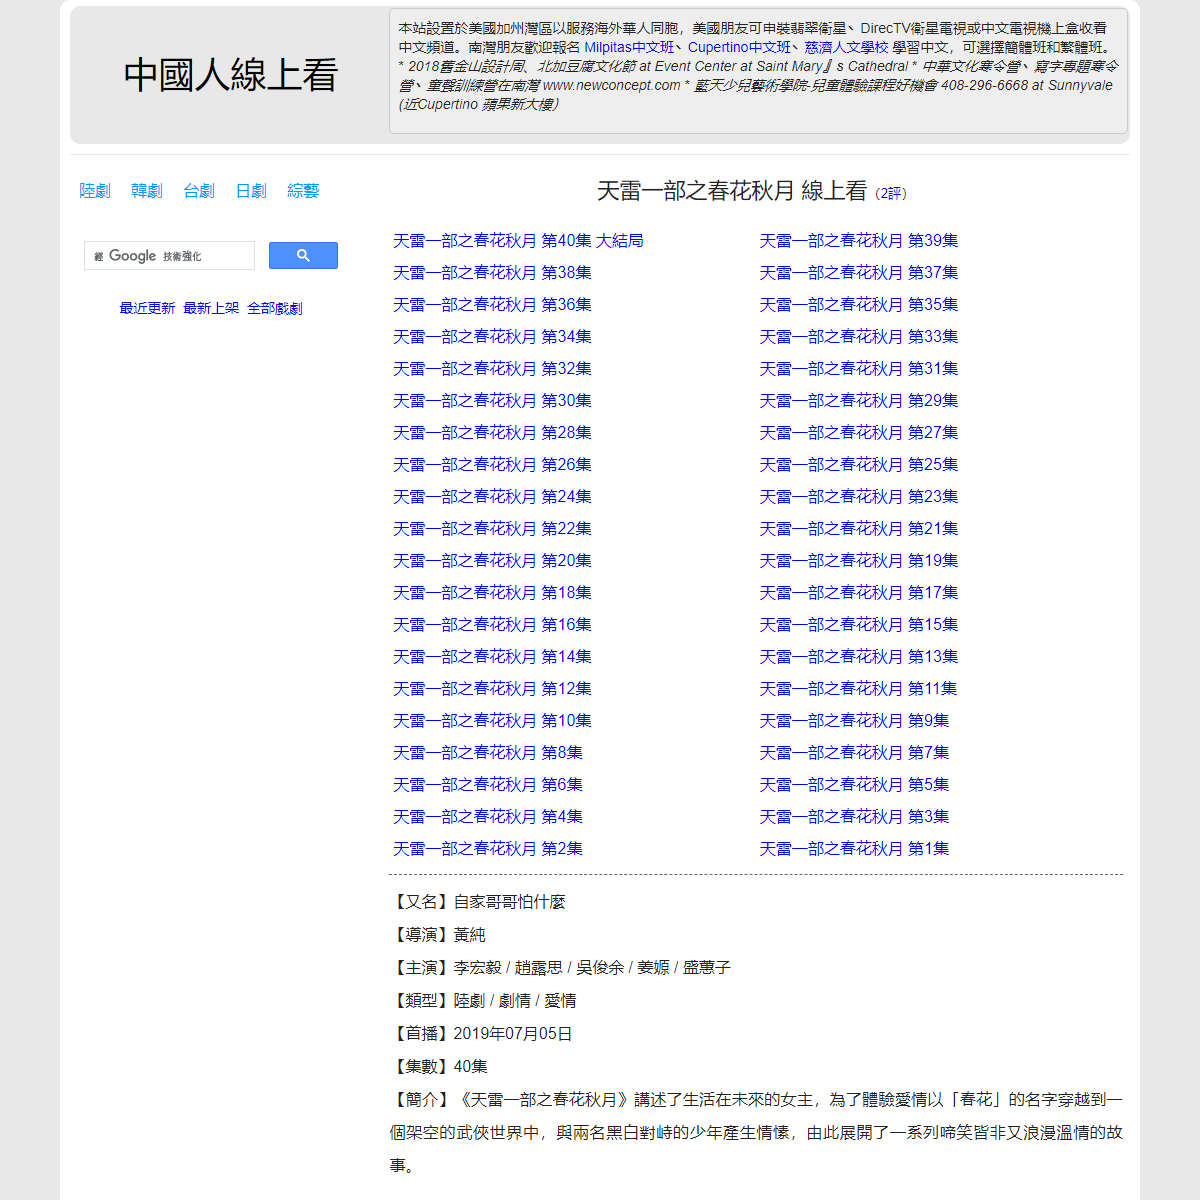 A complete backup of https://chinaq.tv/cn190705/